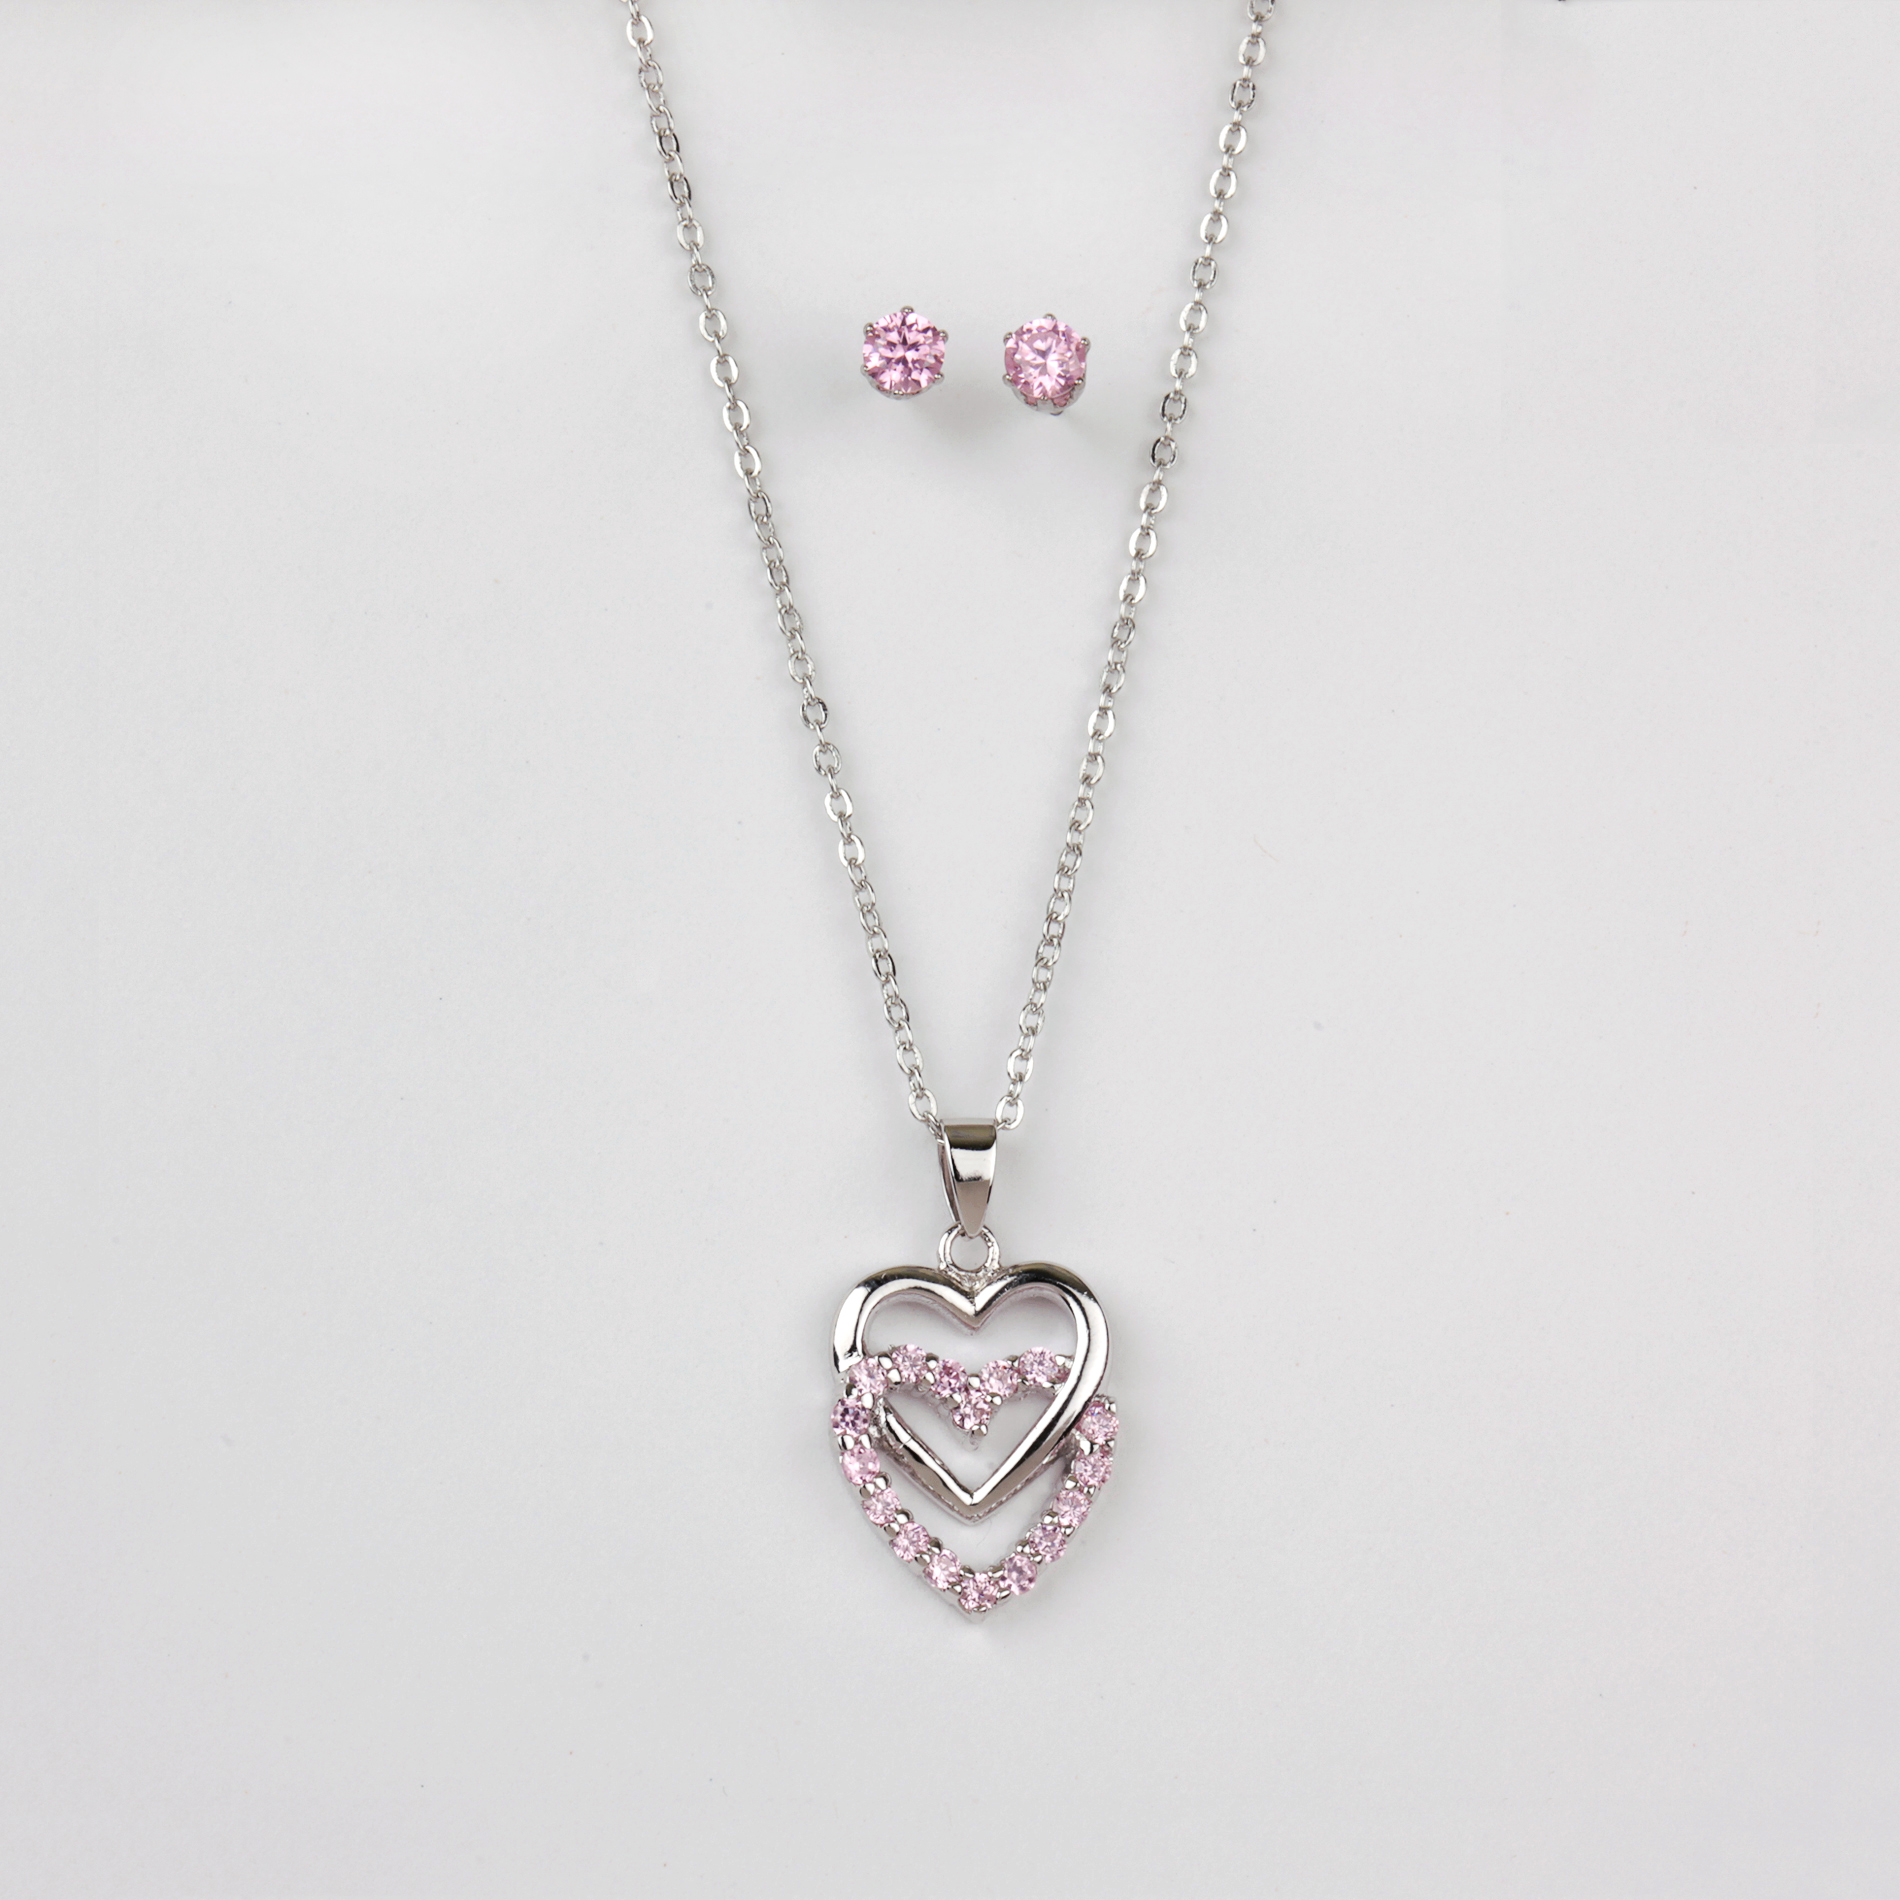 Women’s Double Heart Necklace and Earrings Set—$10.00!